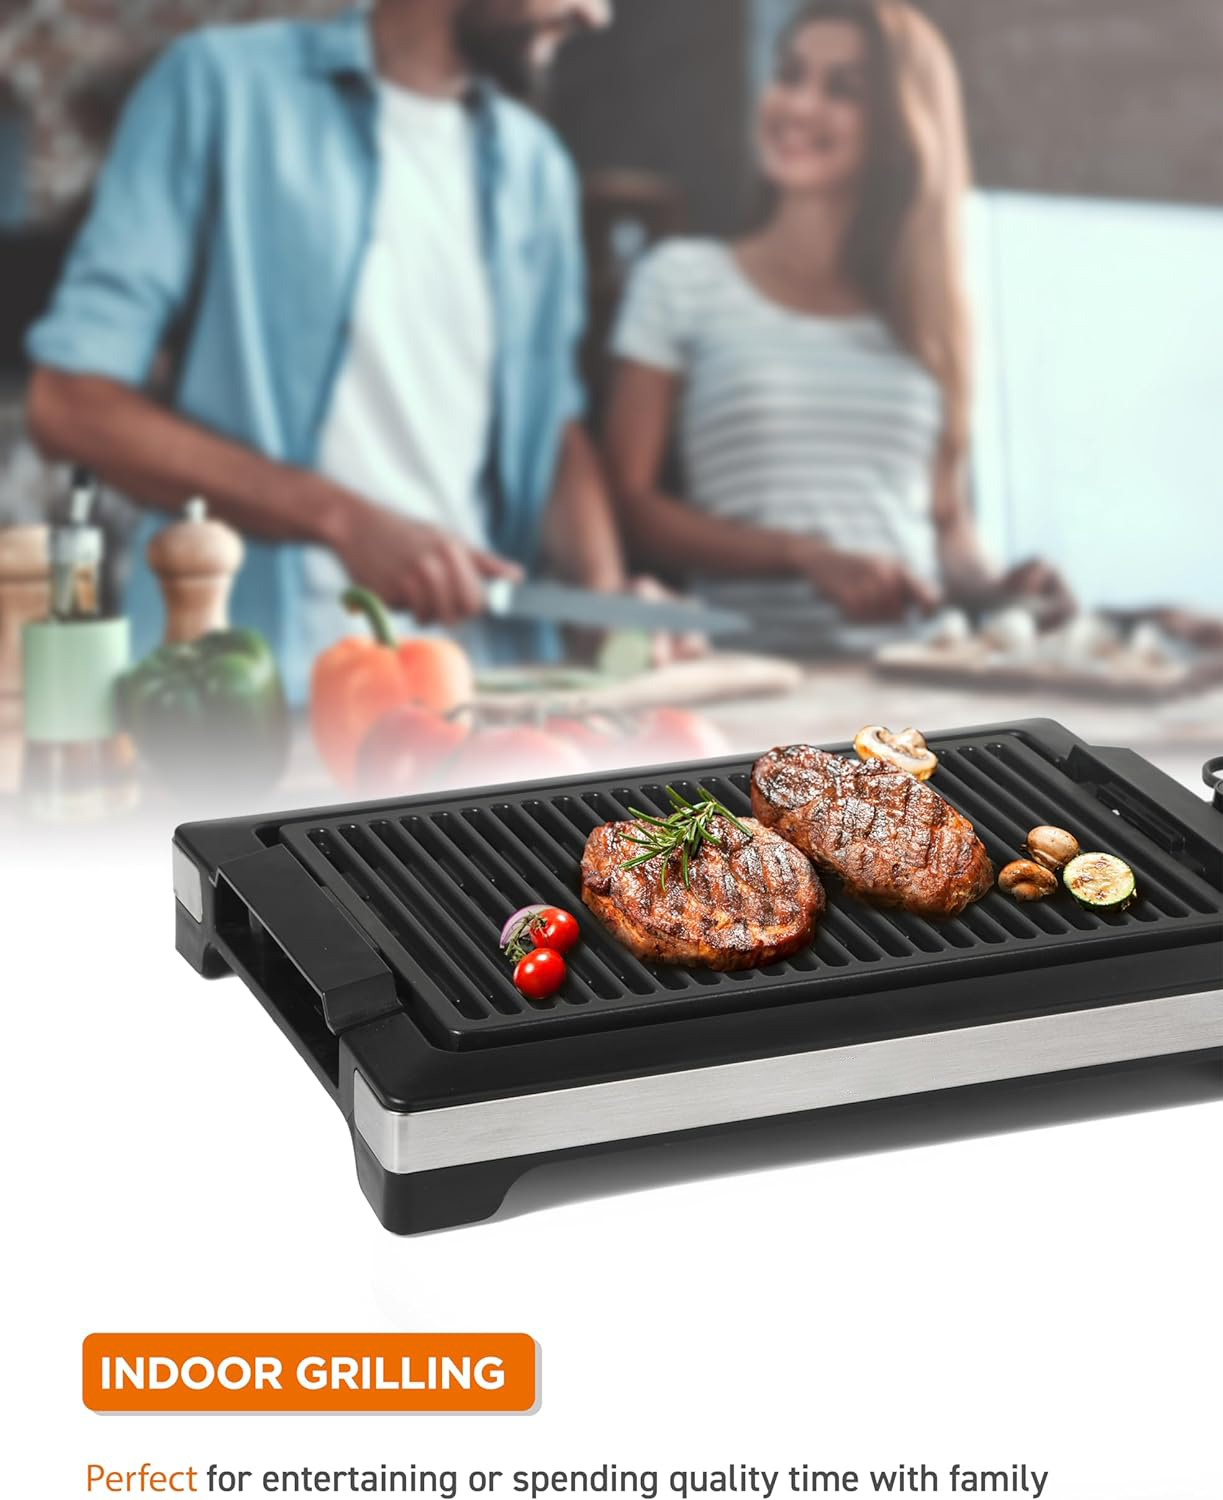 Indoor Grill for Tabletop, Countertop or Kitchen, 1600W Electric Grill with Adjustable Temperature Control, Stainless Steel and Black Portable Grill for Indoor Use